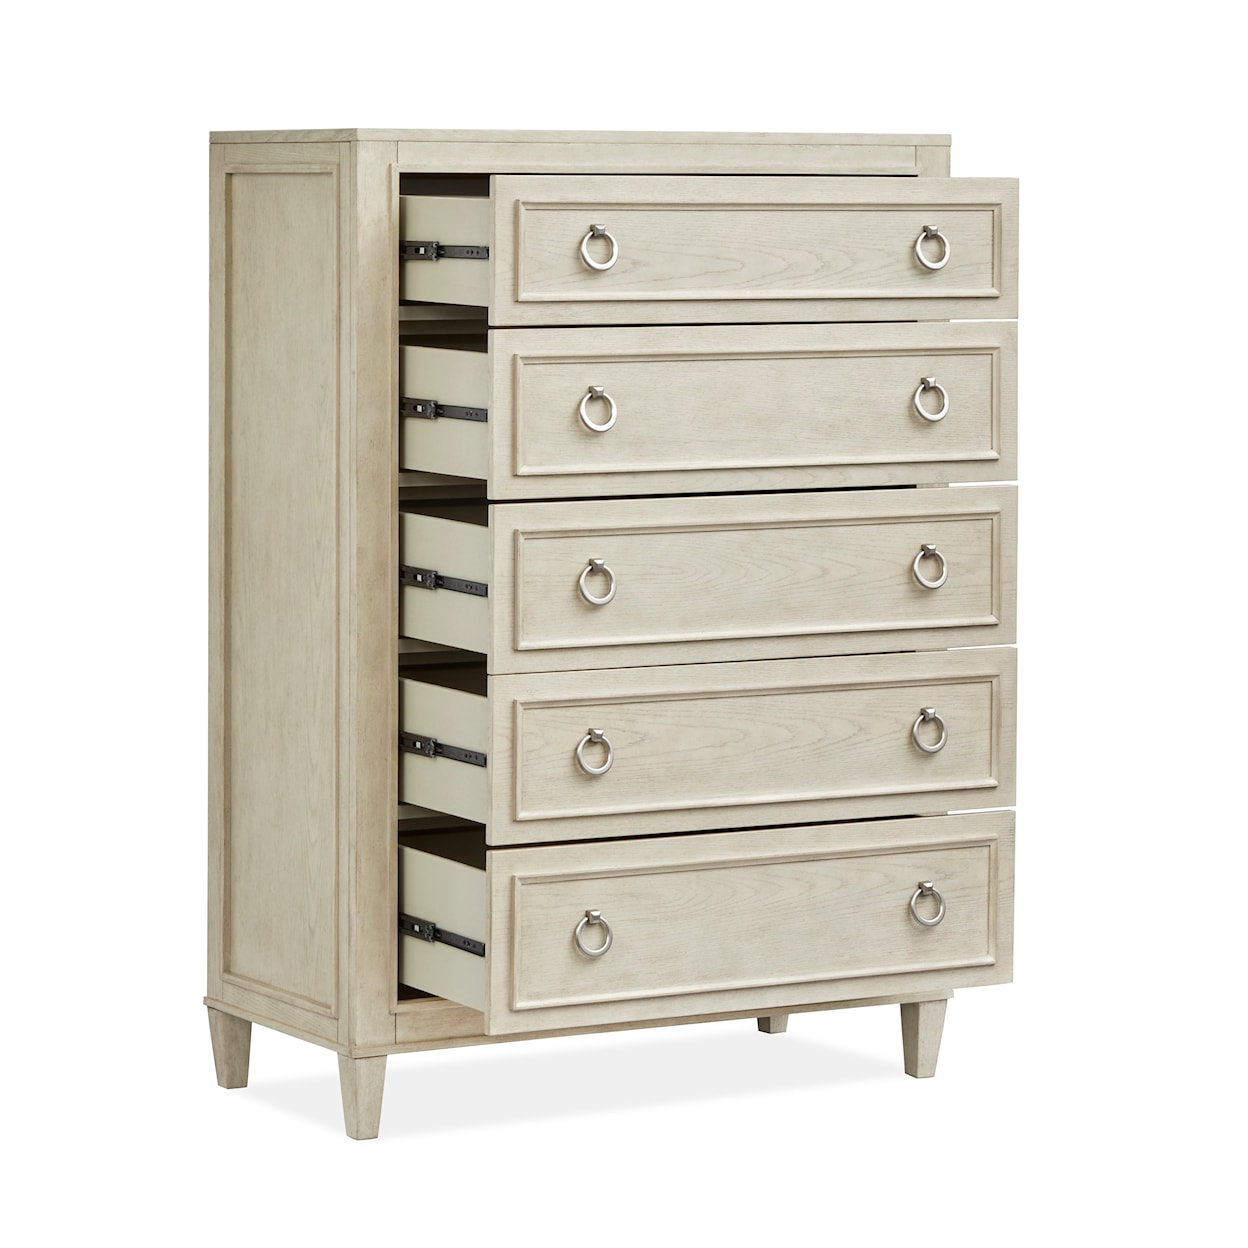 Magnussen Home Sheridan Bedroom Chest of Drawers